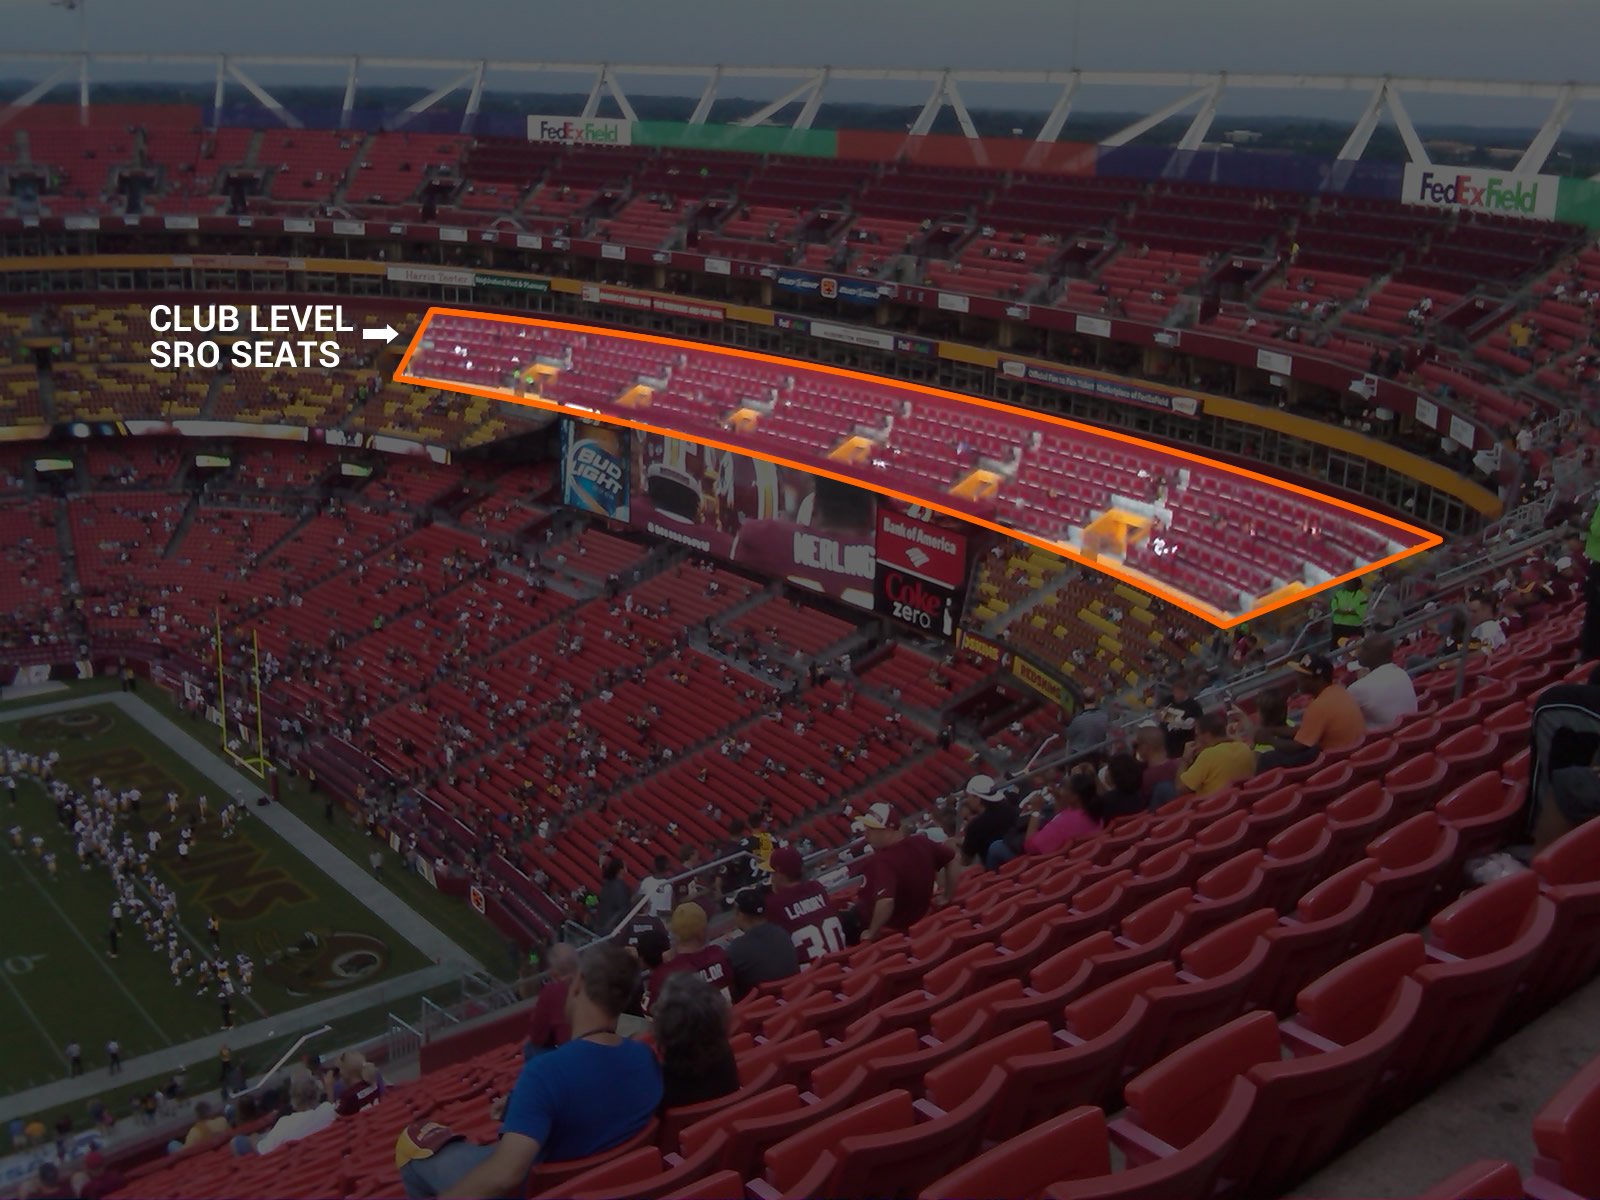 FedExField Seating